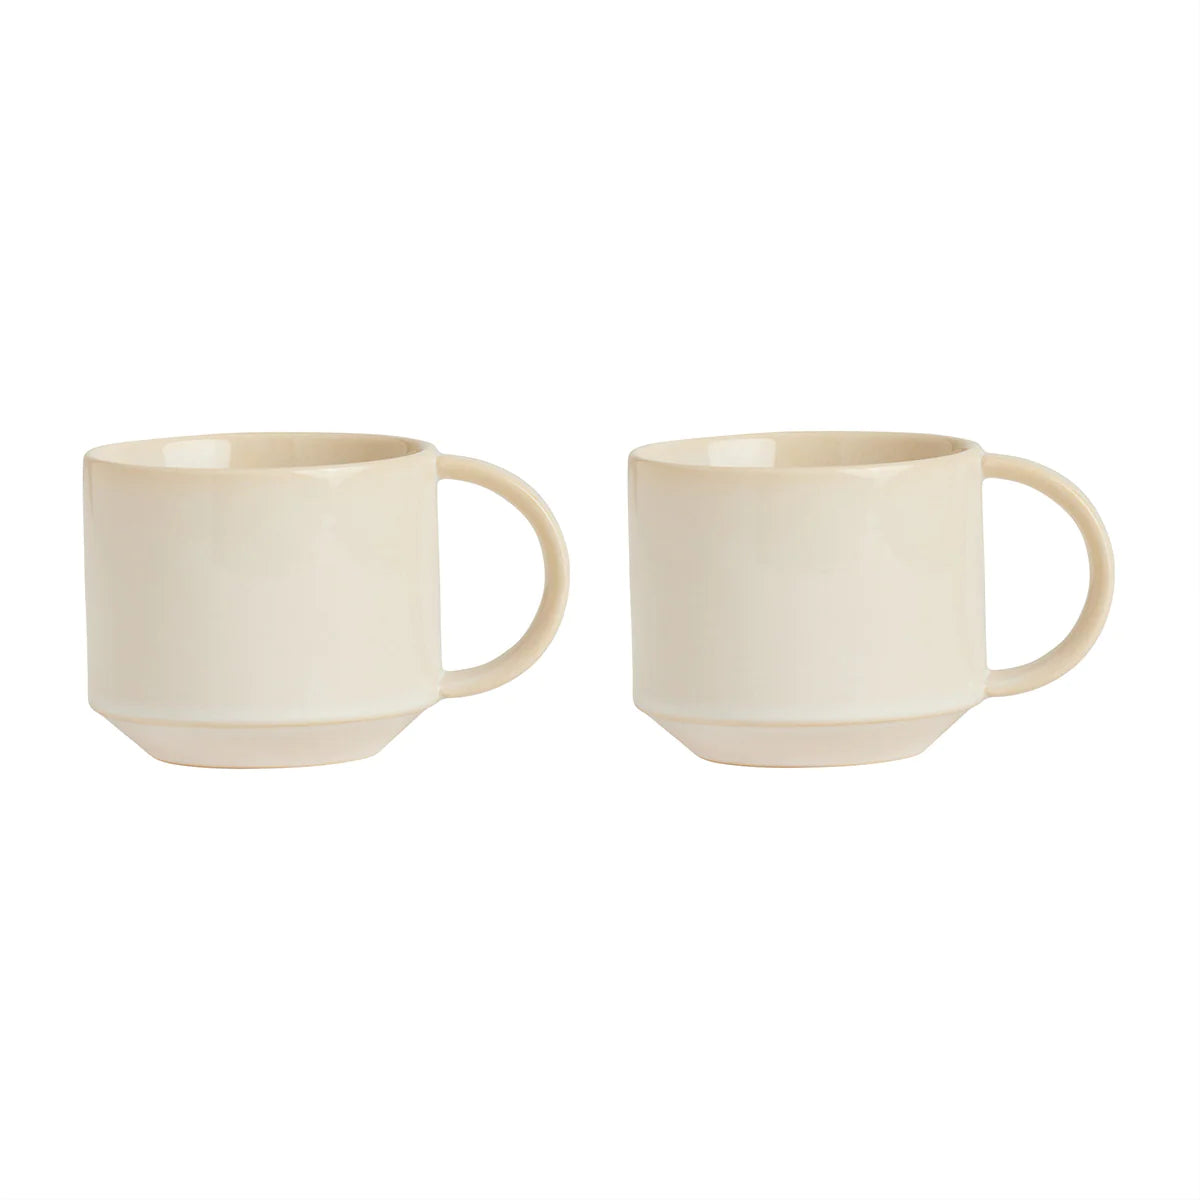 Yuka Cup - Pack of 2 - Offwhite